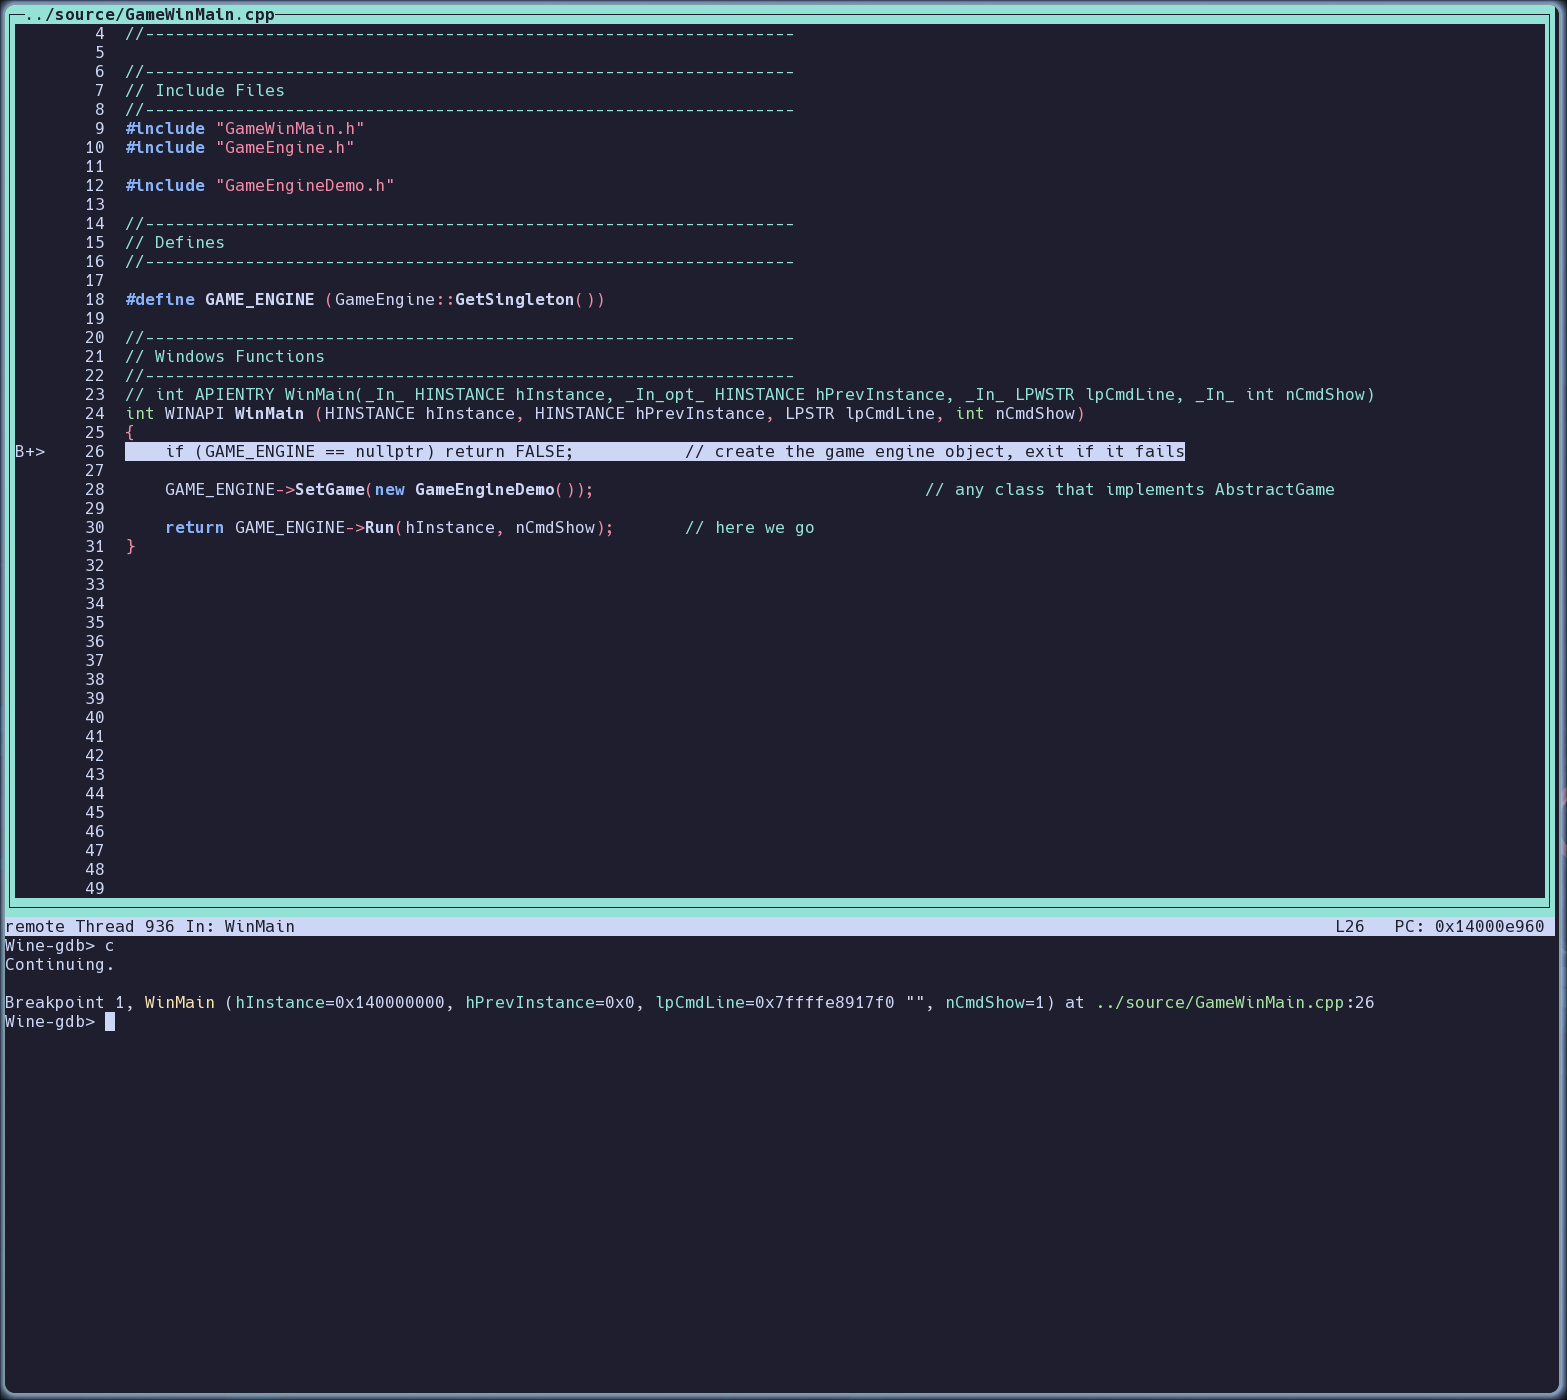 A screenshot of a gdb interface showing source code of a WinMain function which runs the game engine